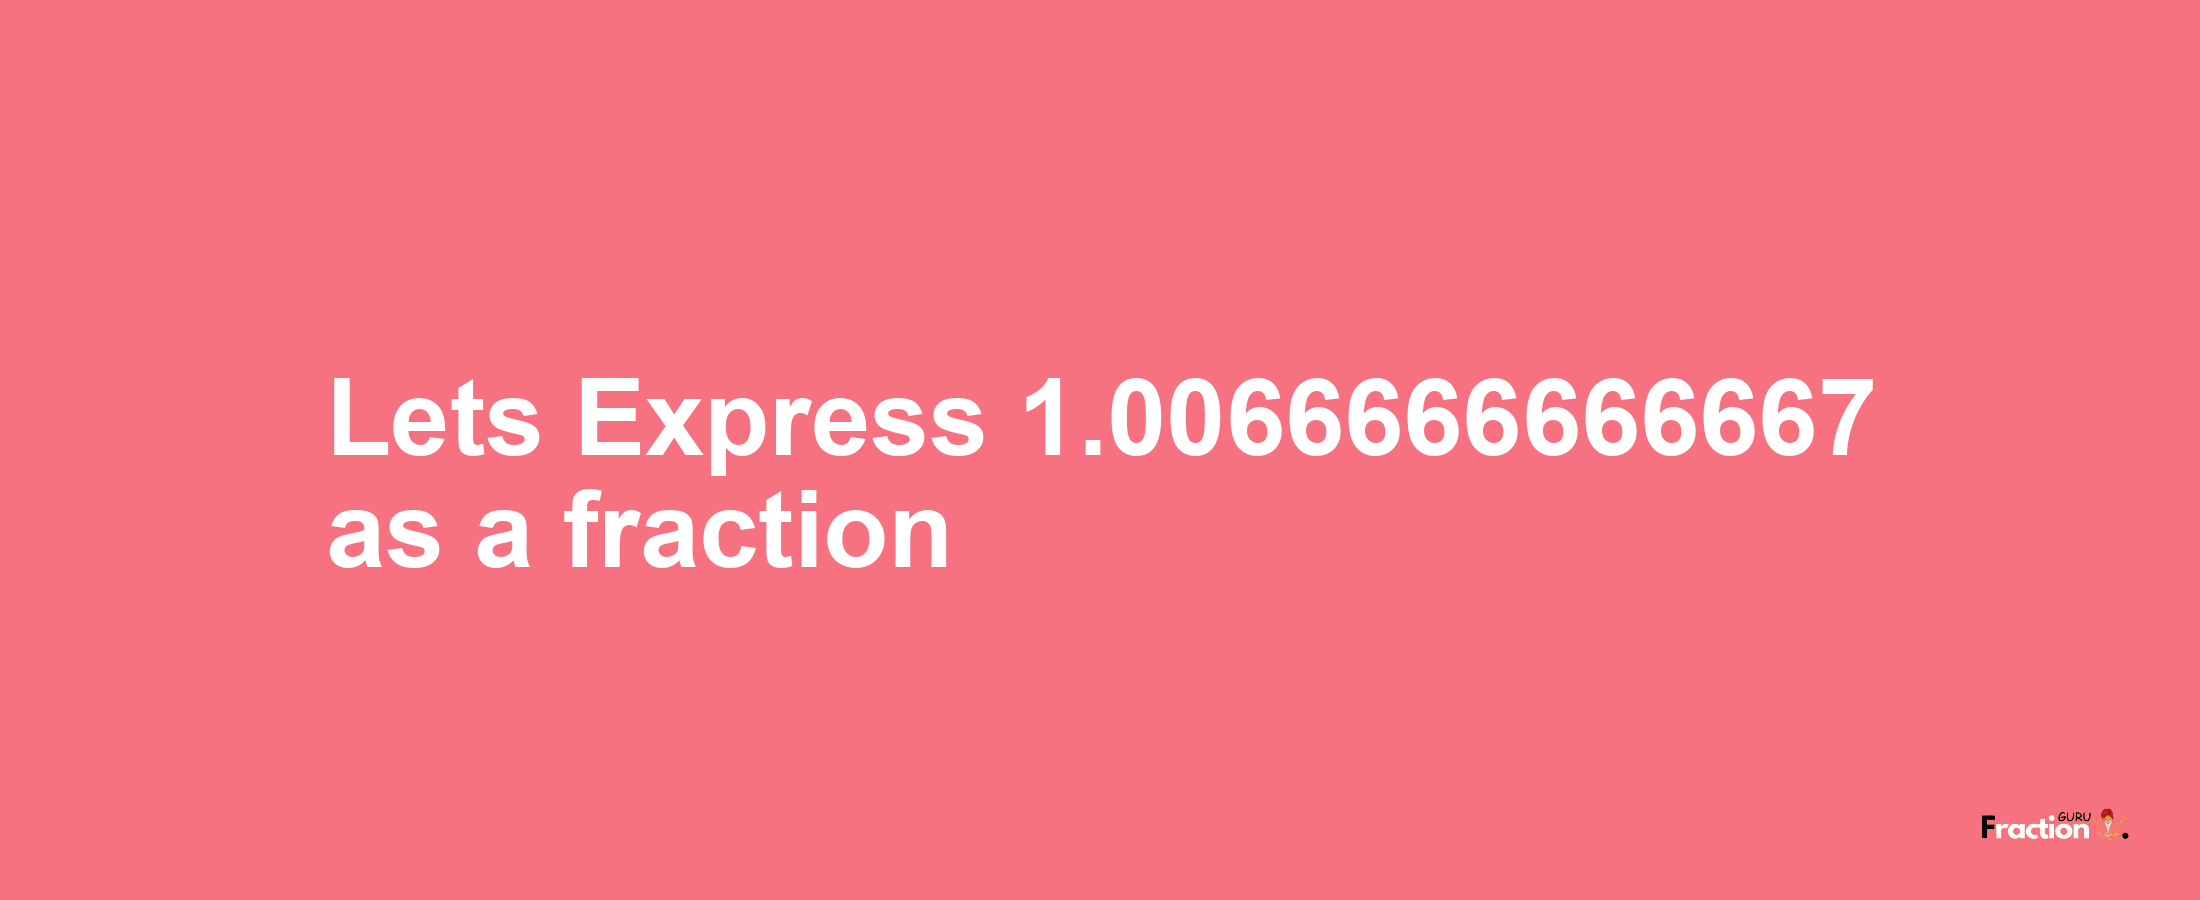 Lets Express 1.0066666666667 as afraction